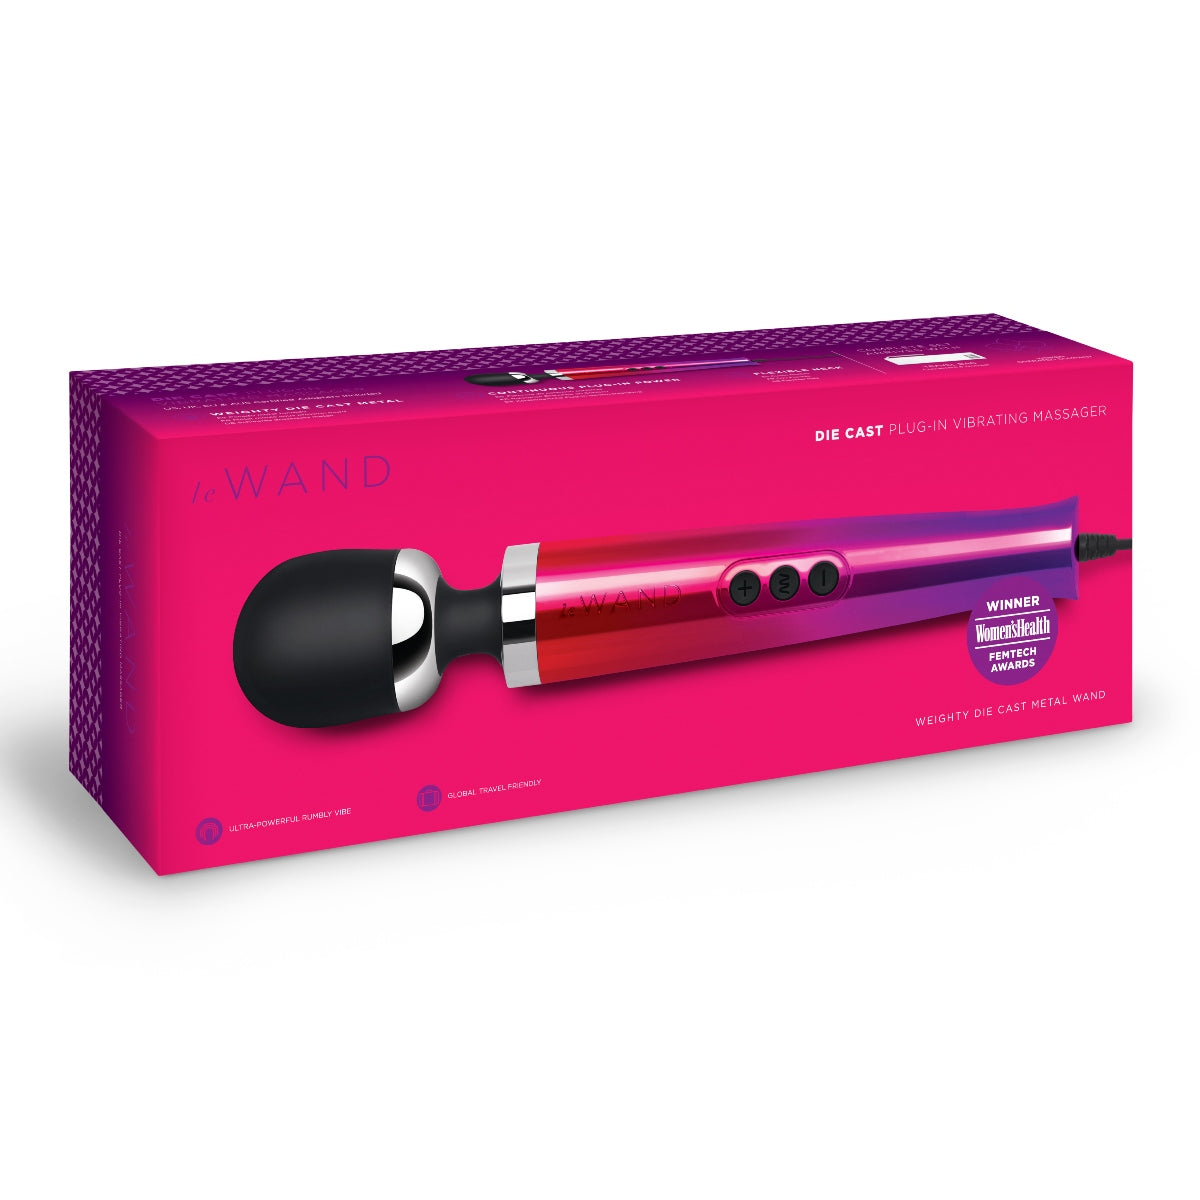 LE WAND Diecast Plug In Vibrating Wand Massager